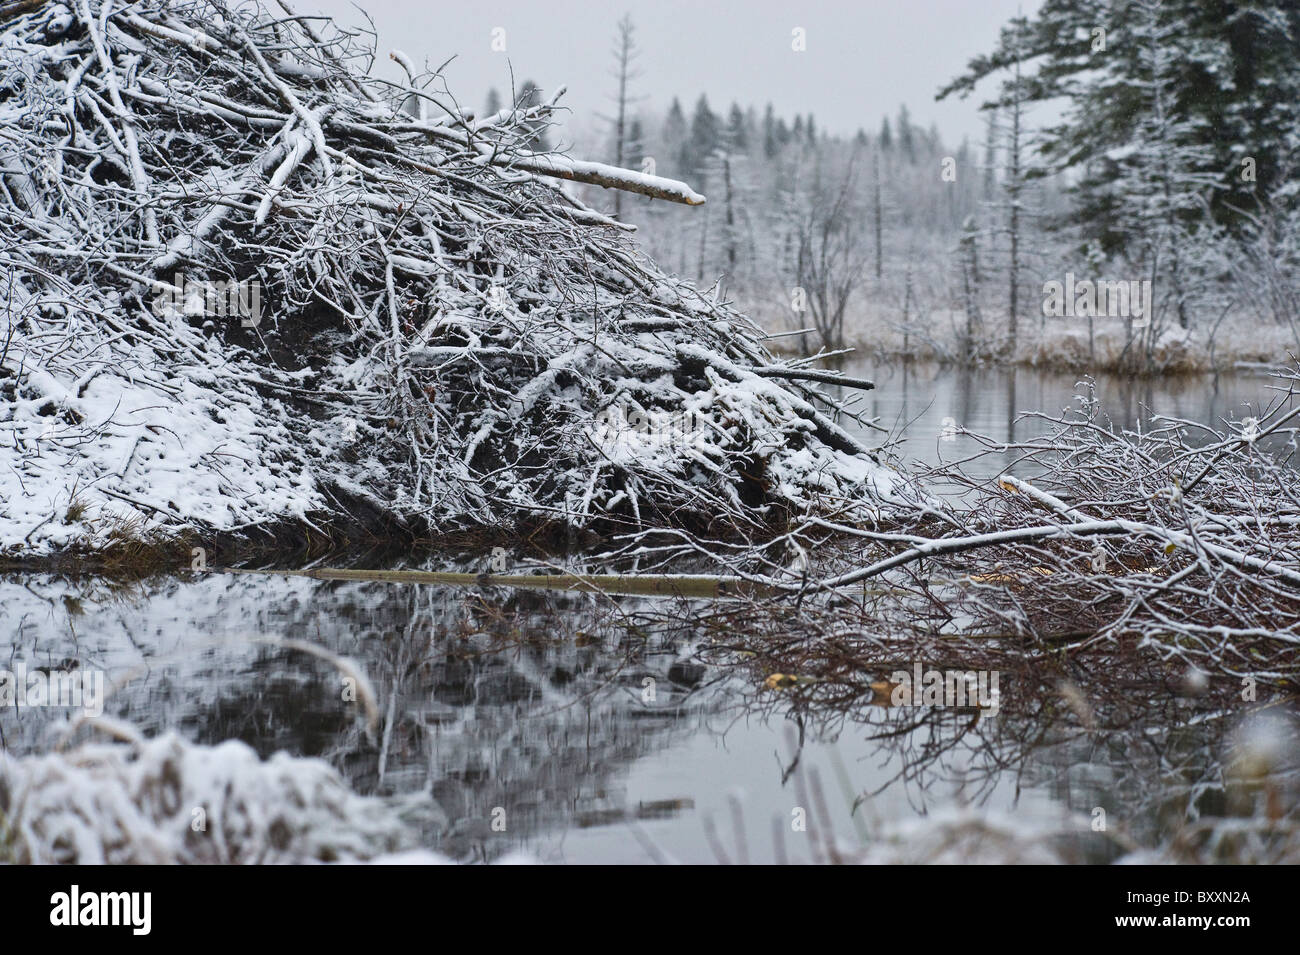 A winter landscape image of a beaver lodge and food supply with a fresh topping of white snow. Stock Photo